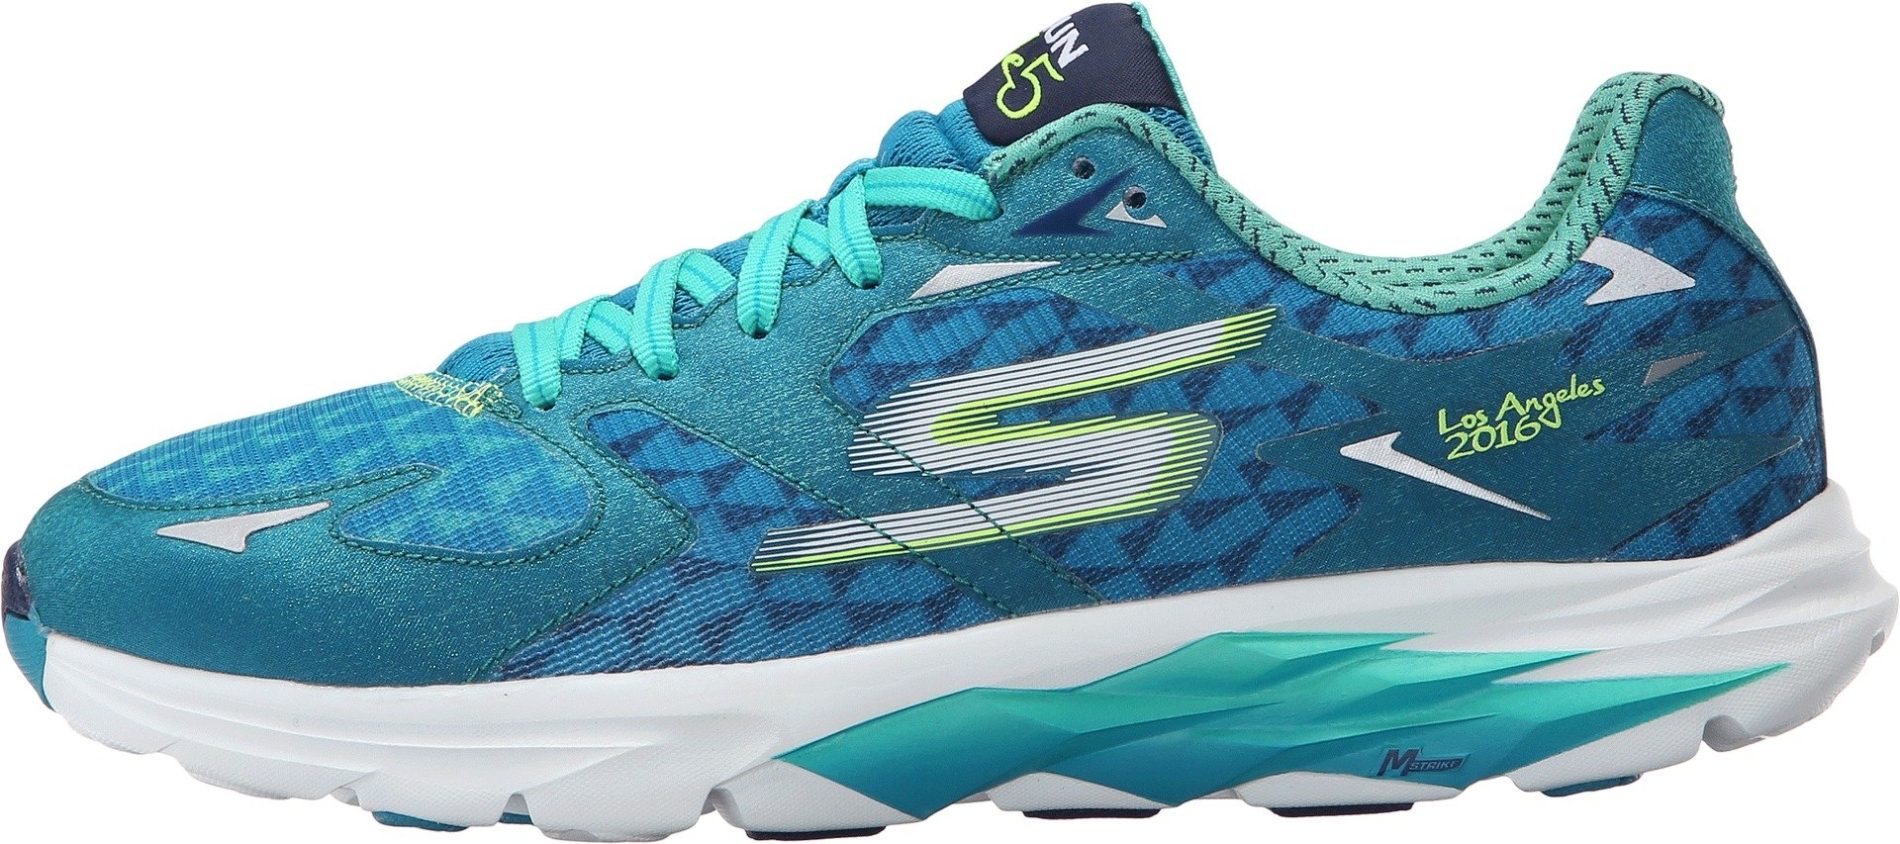 Skechers Stability Running Shoes 